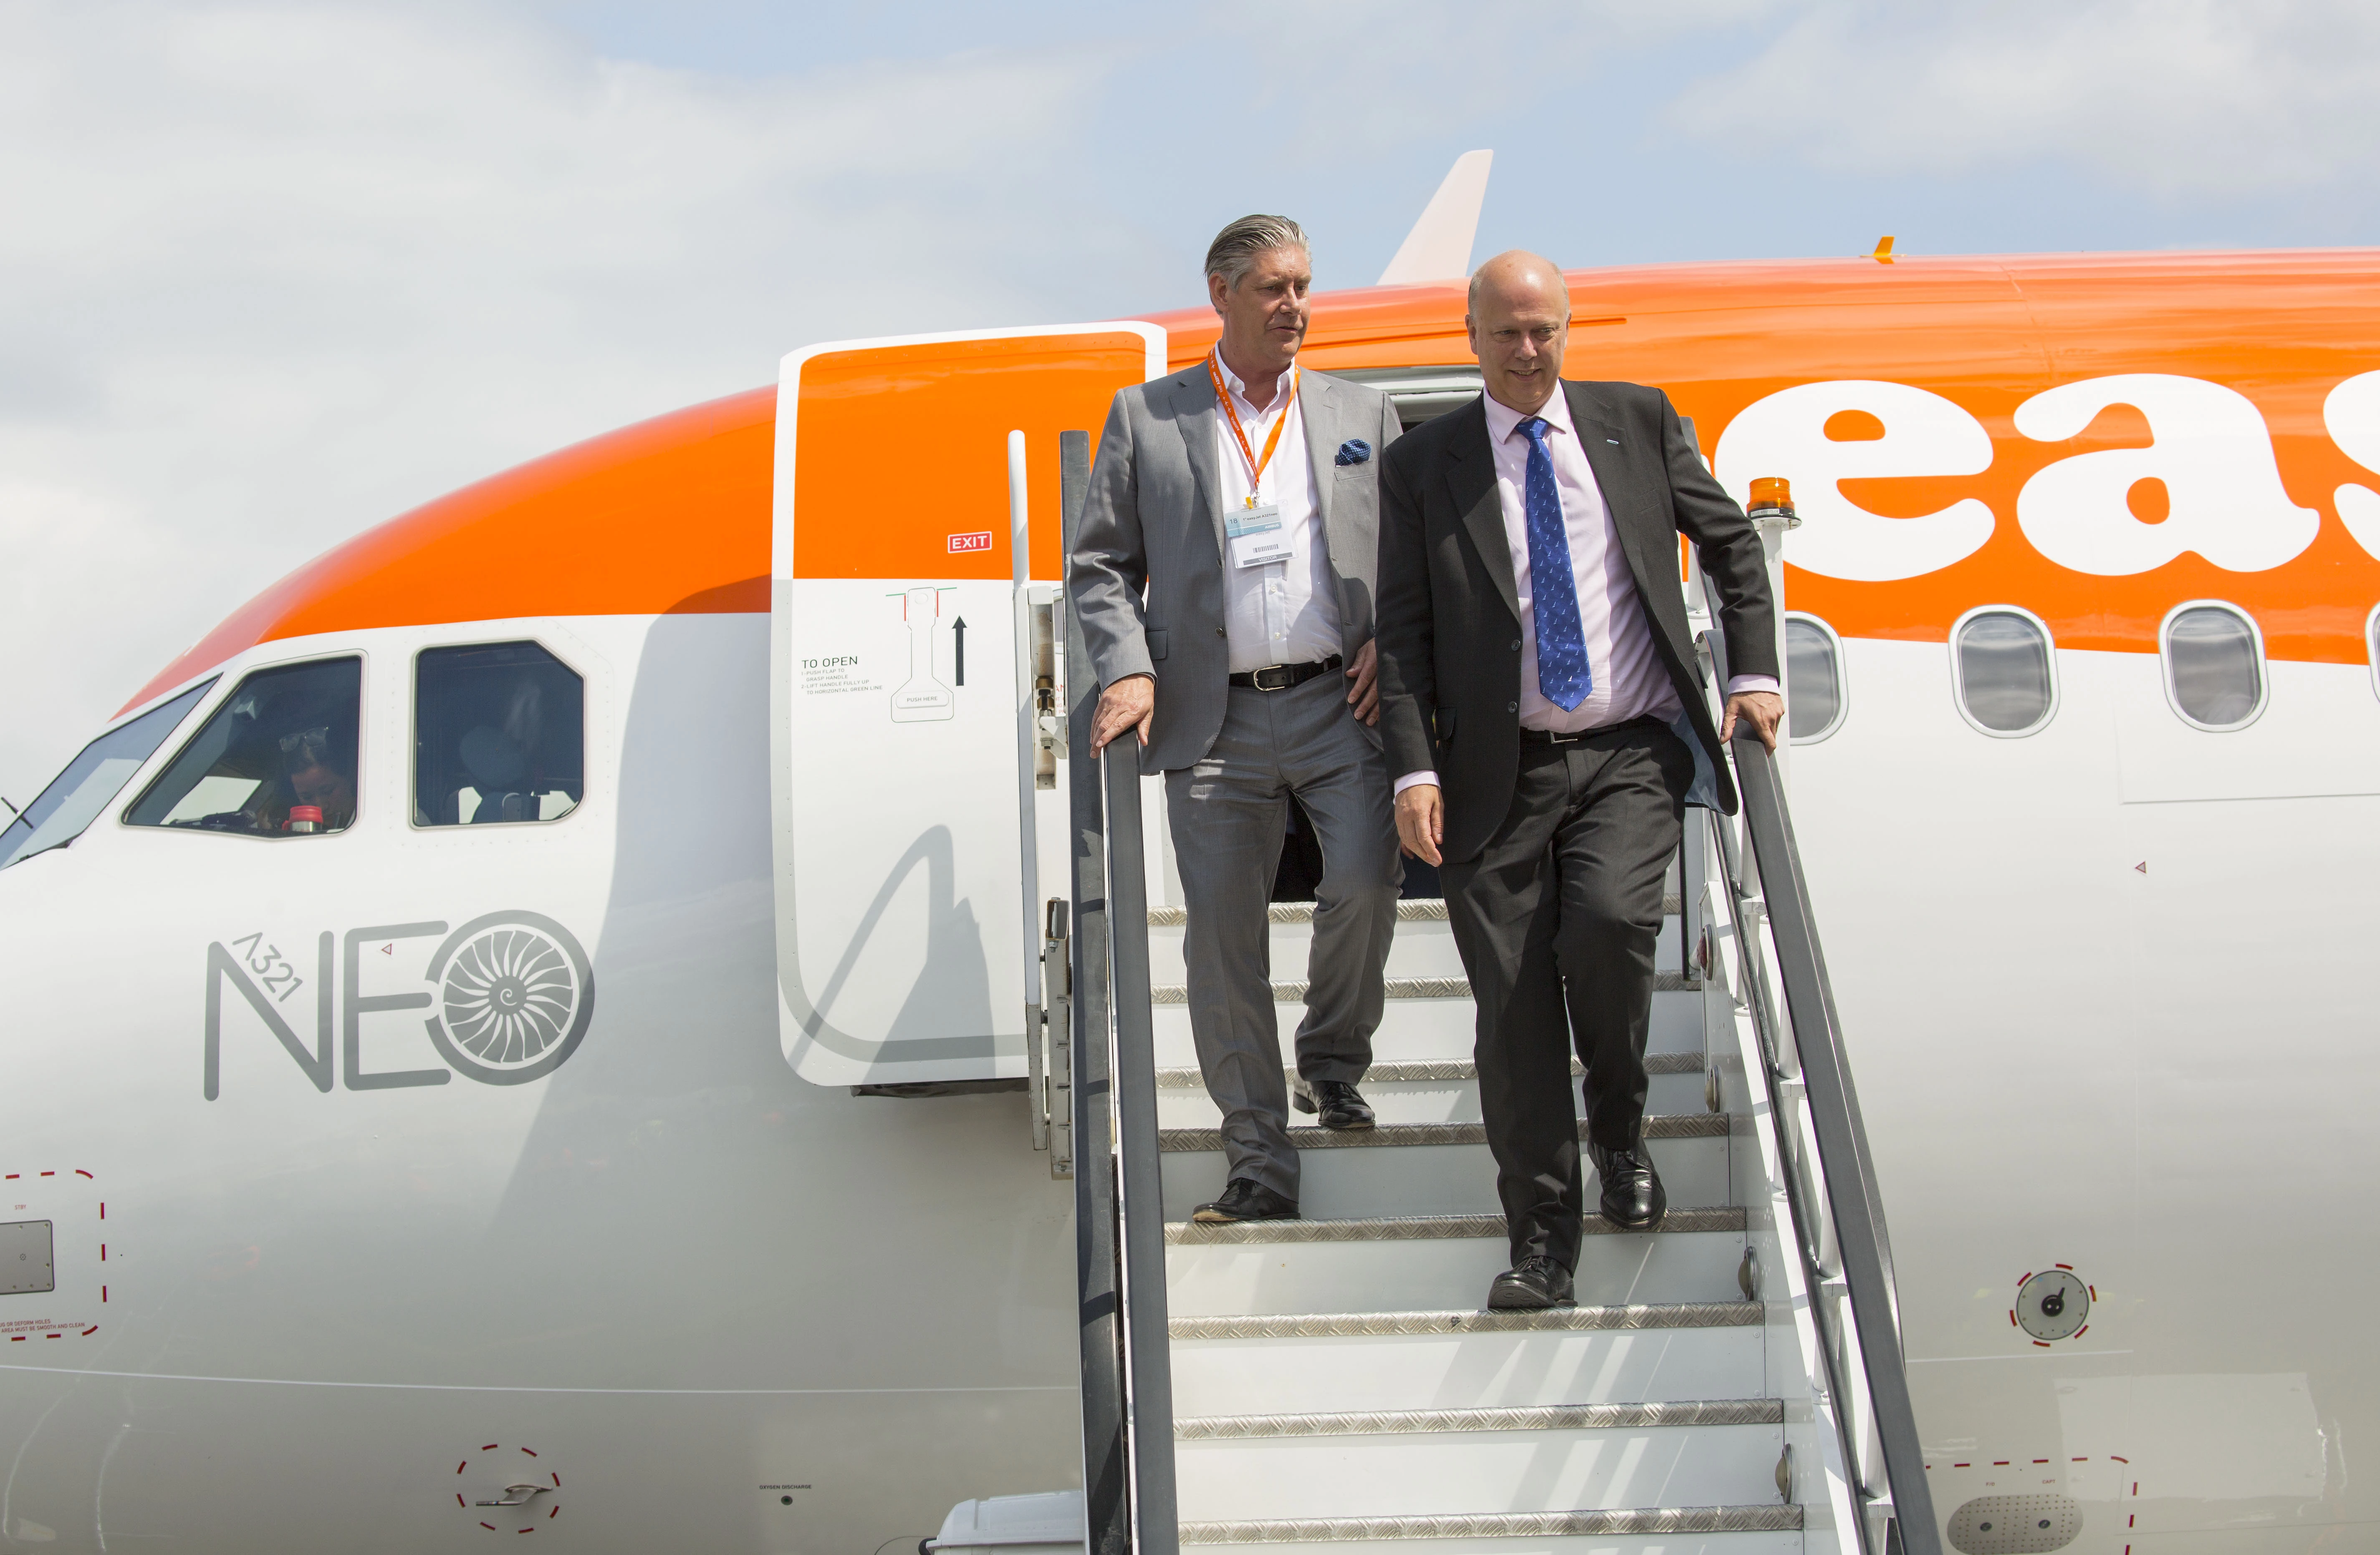 easyJet CEO Johan Lundgren (left) and Chris Grayling MP at the airshow